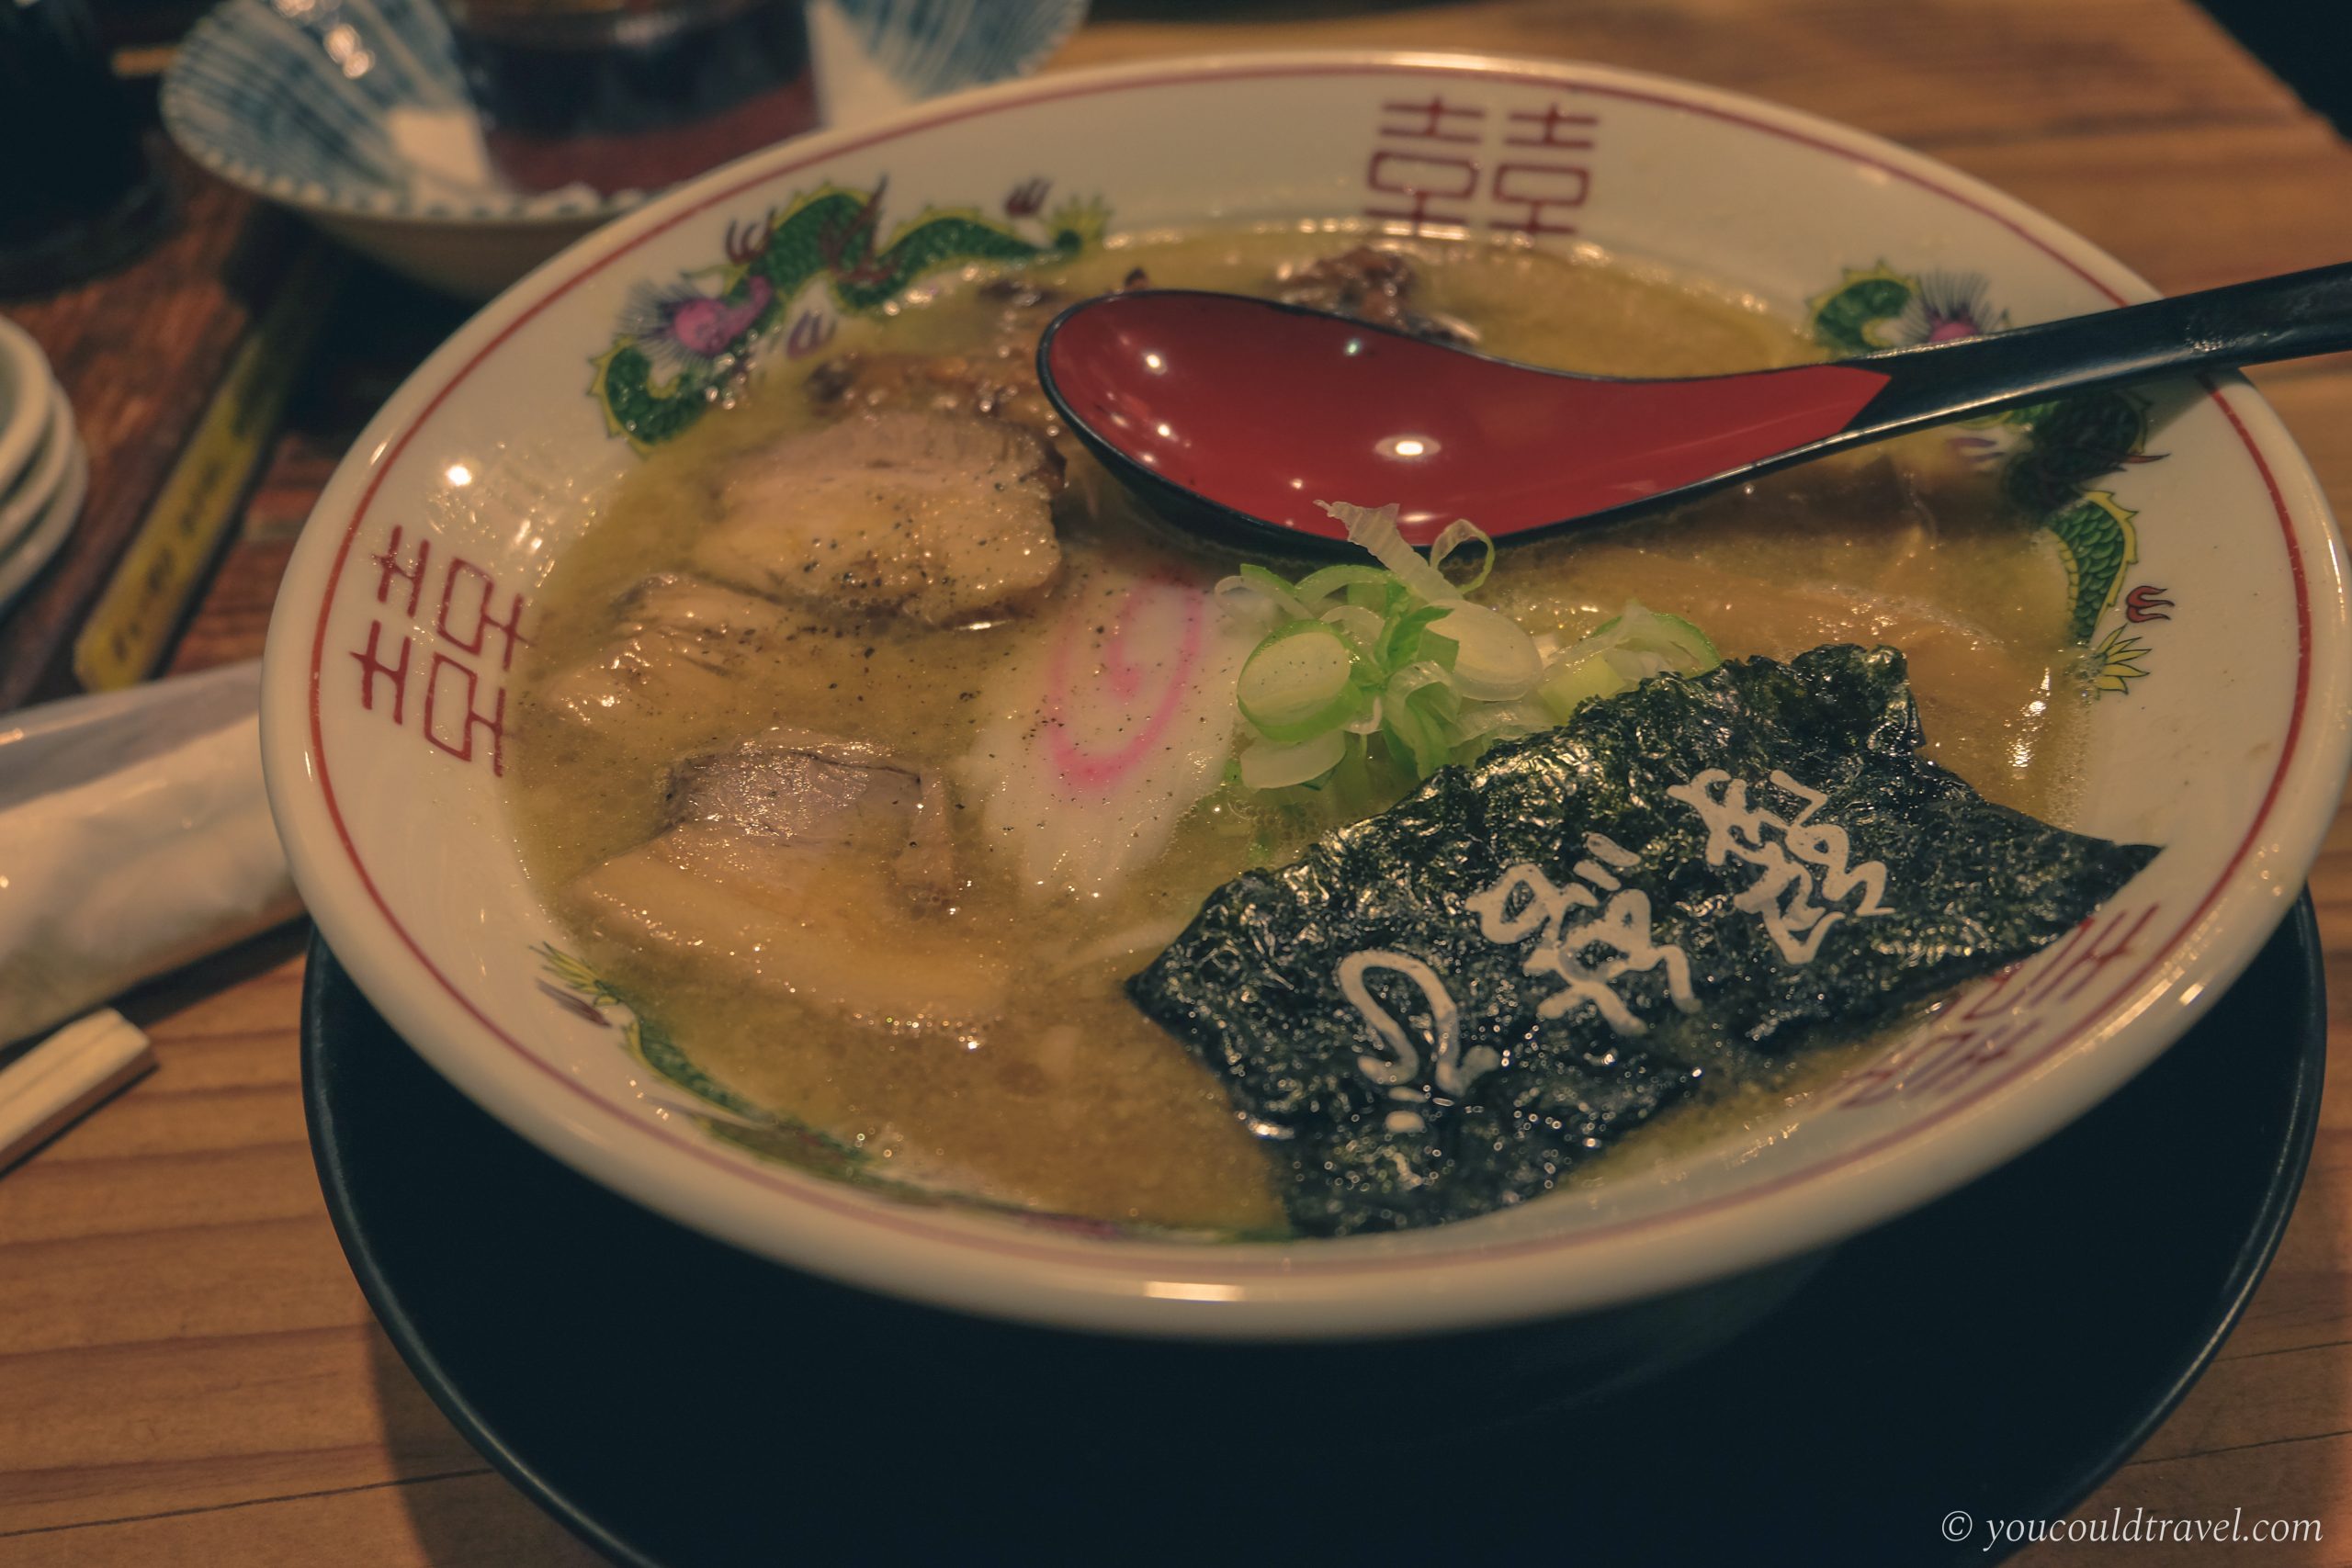 The ramen in Osaka which was one of the best I've had in Japan